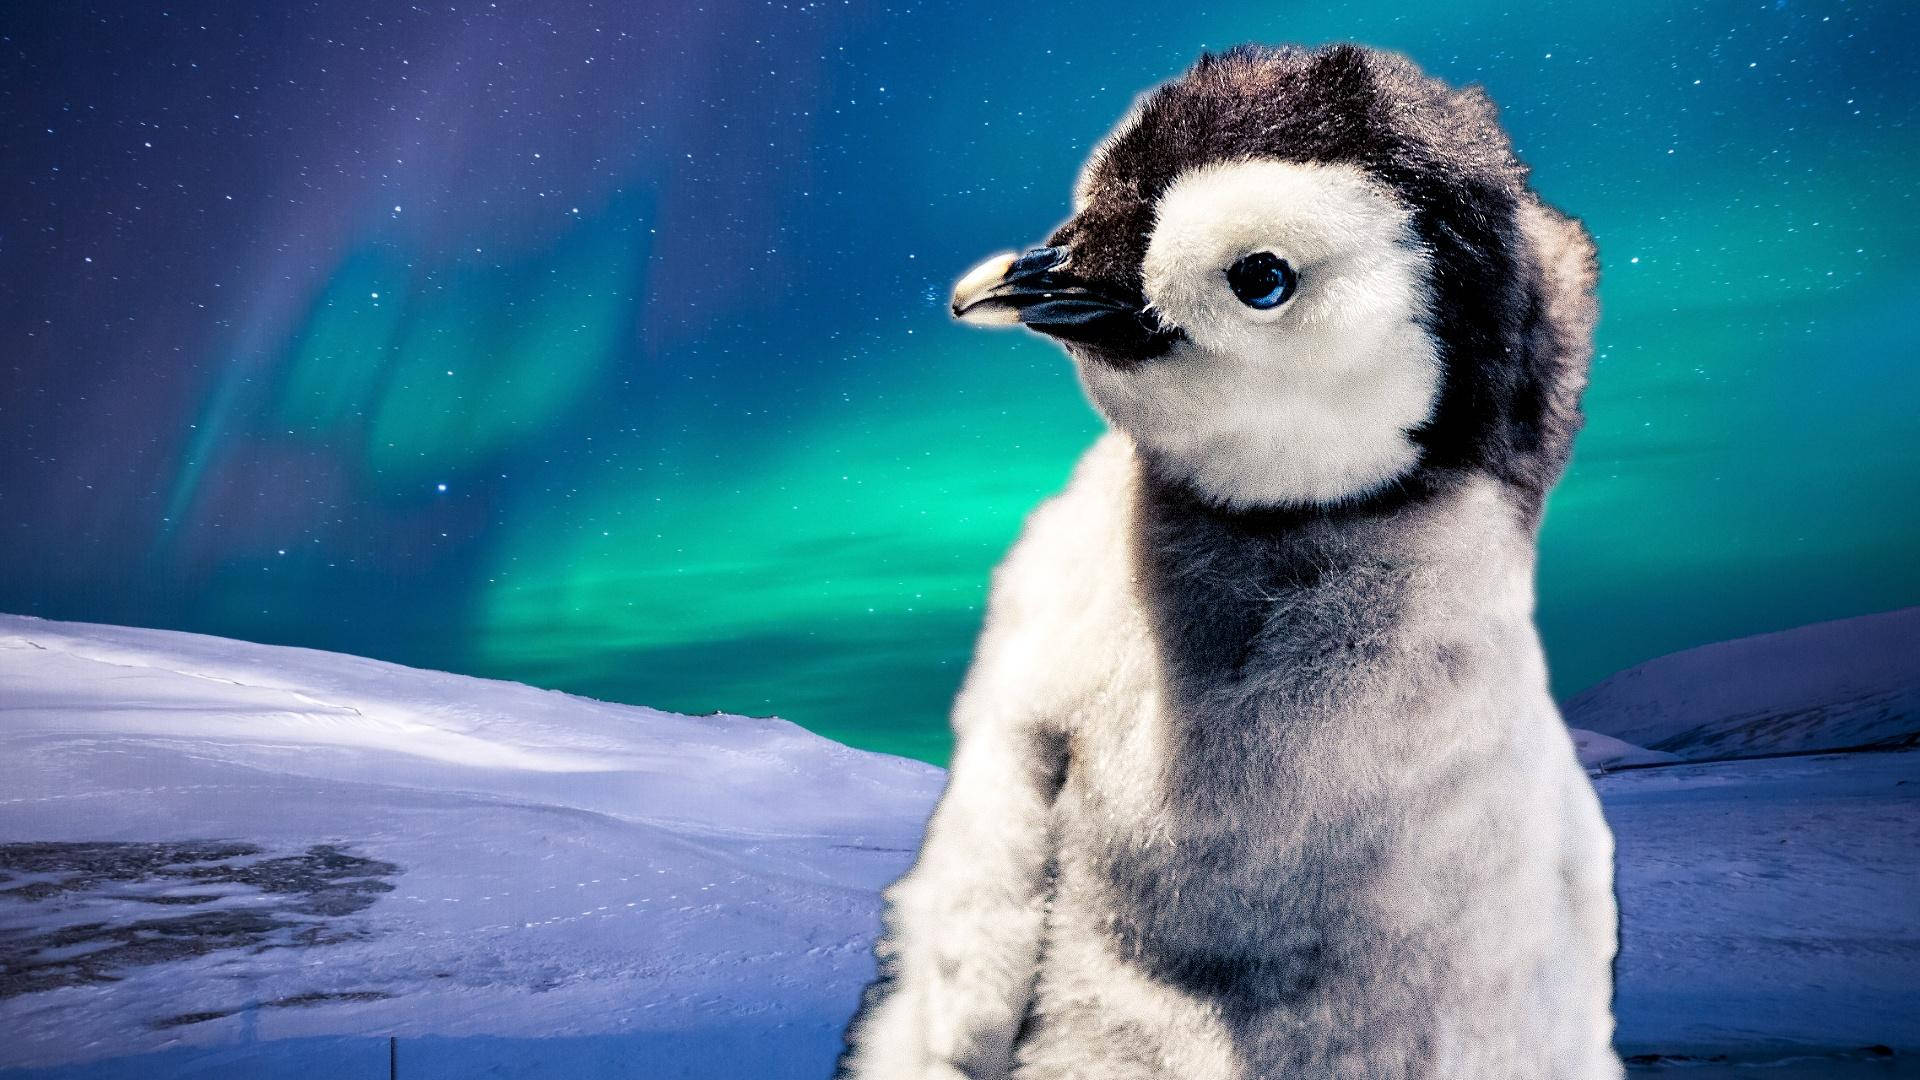 Baby Penguin And Northern Lights